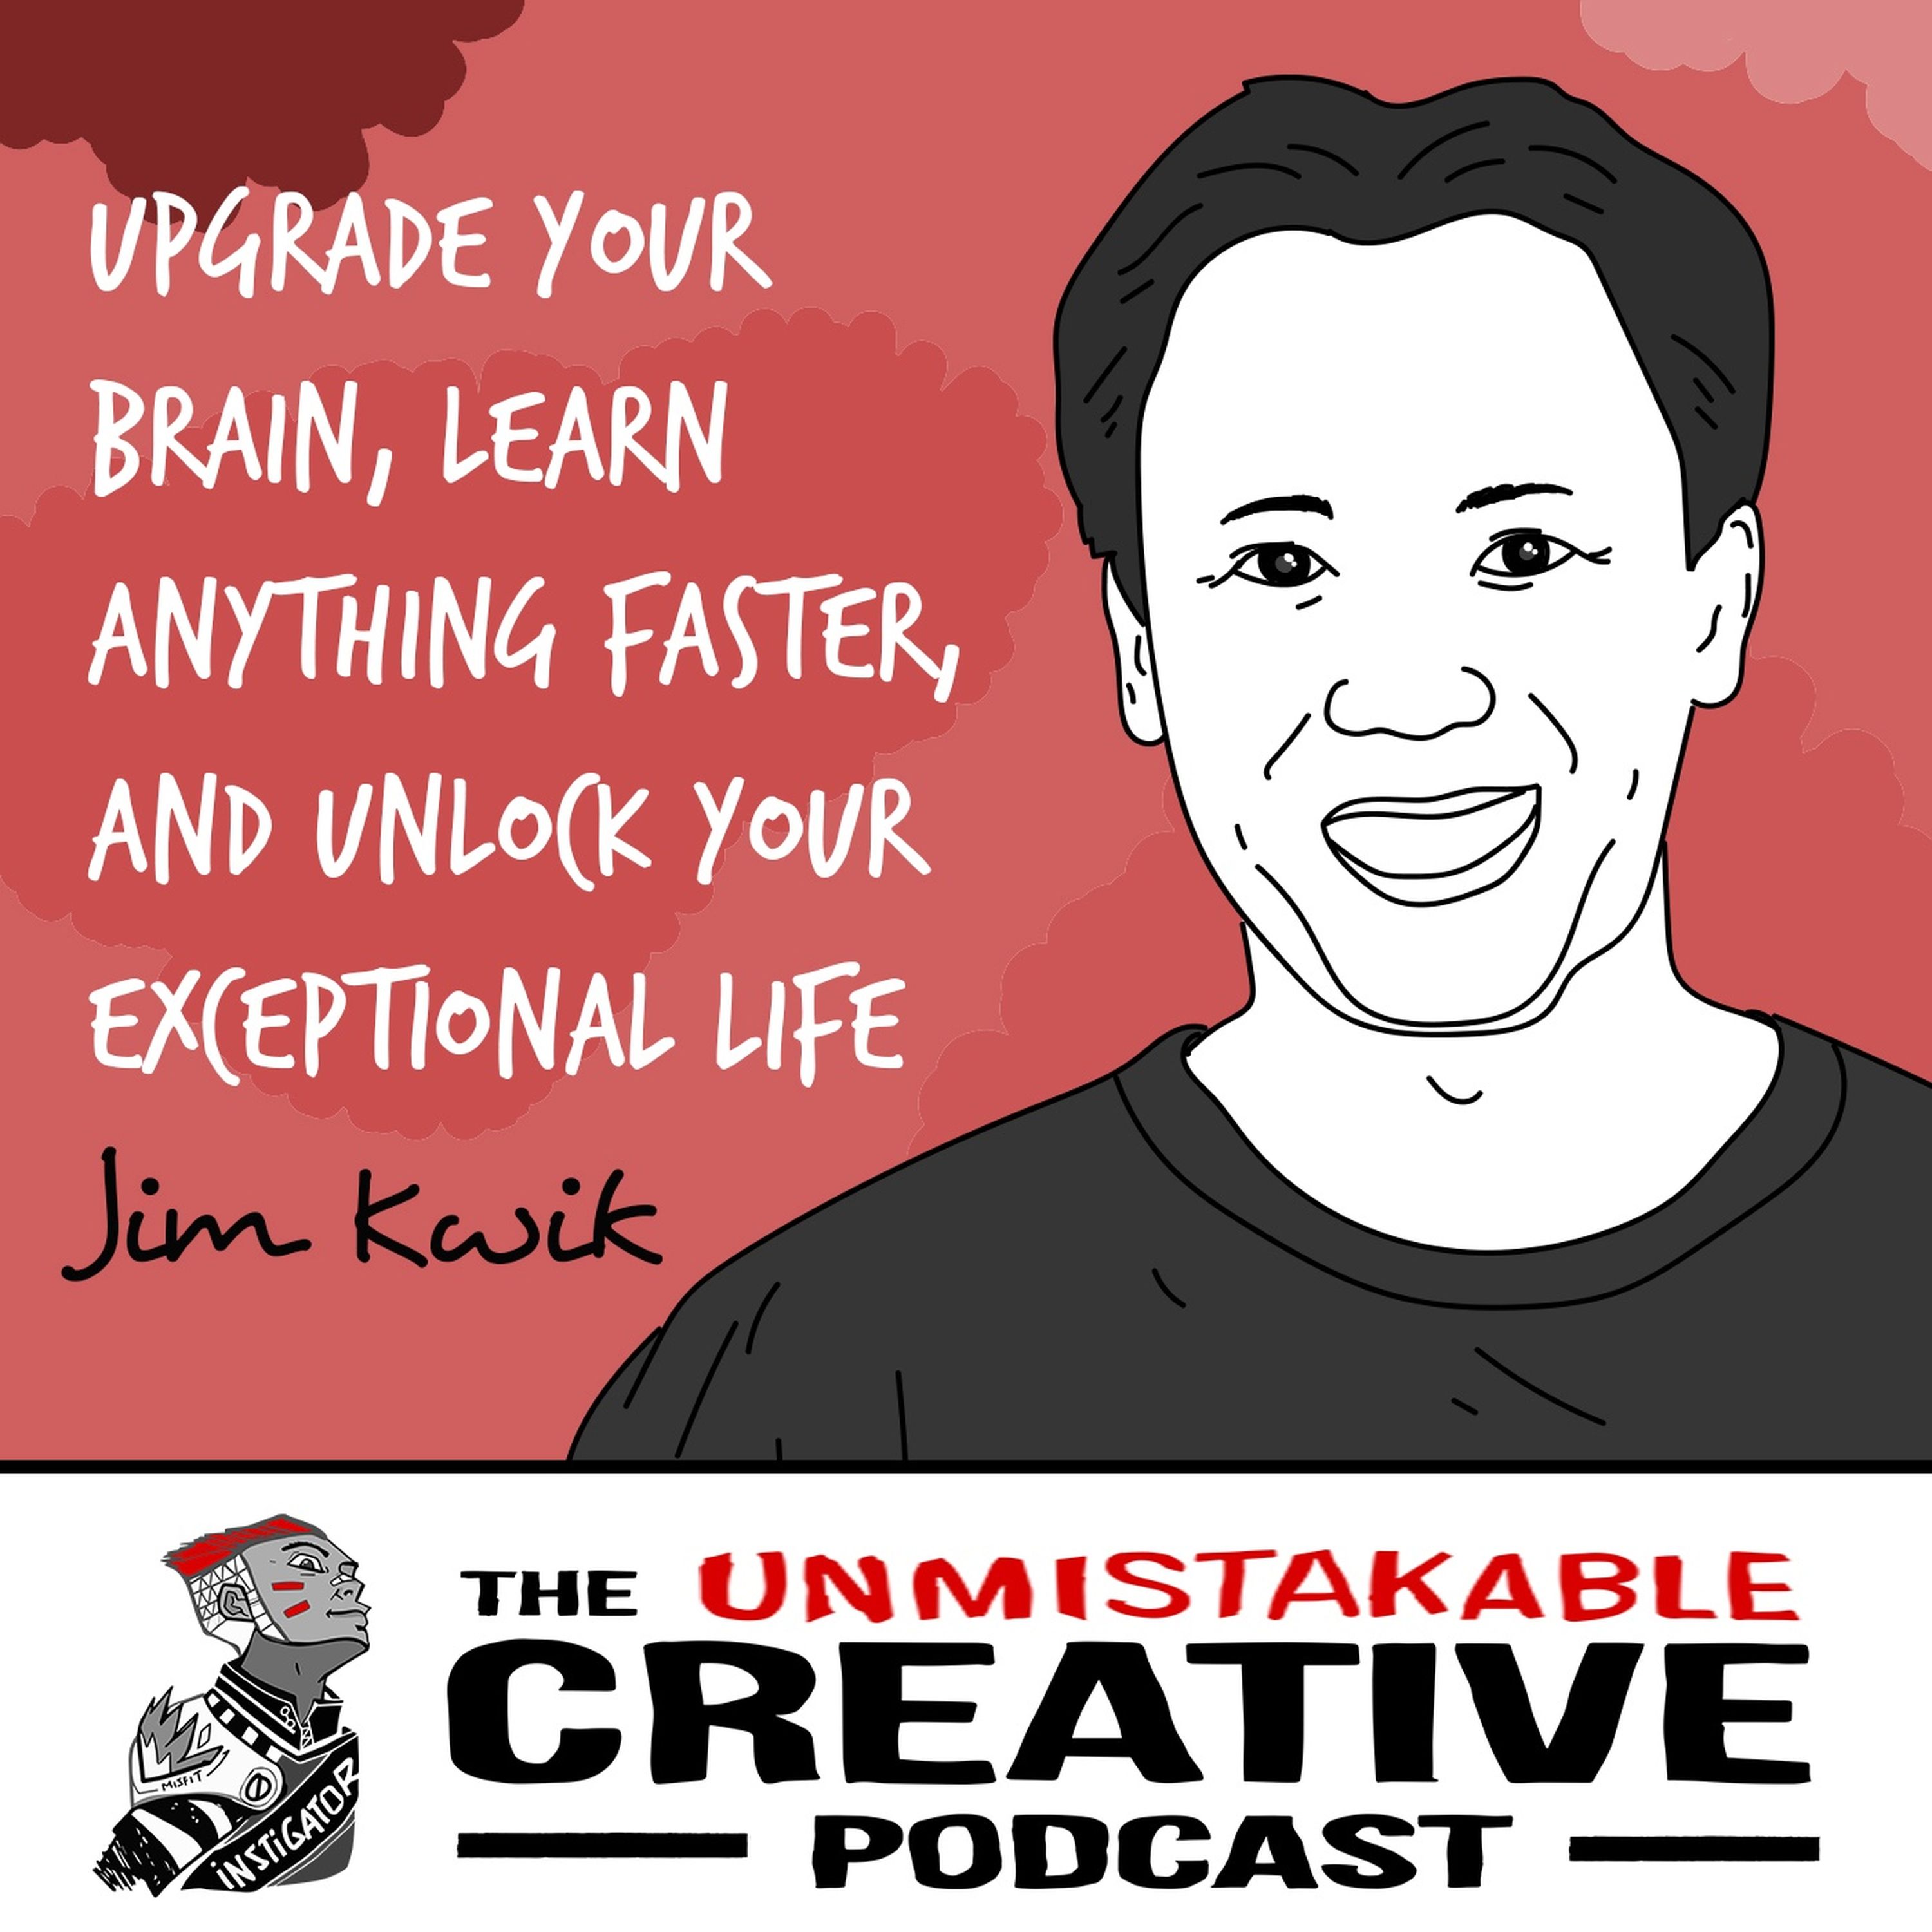 Jim Kwik | Upgrade Your Brain, Learn Anything Faster, and Unlock Your Exceptional Life Image